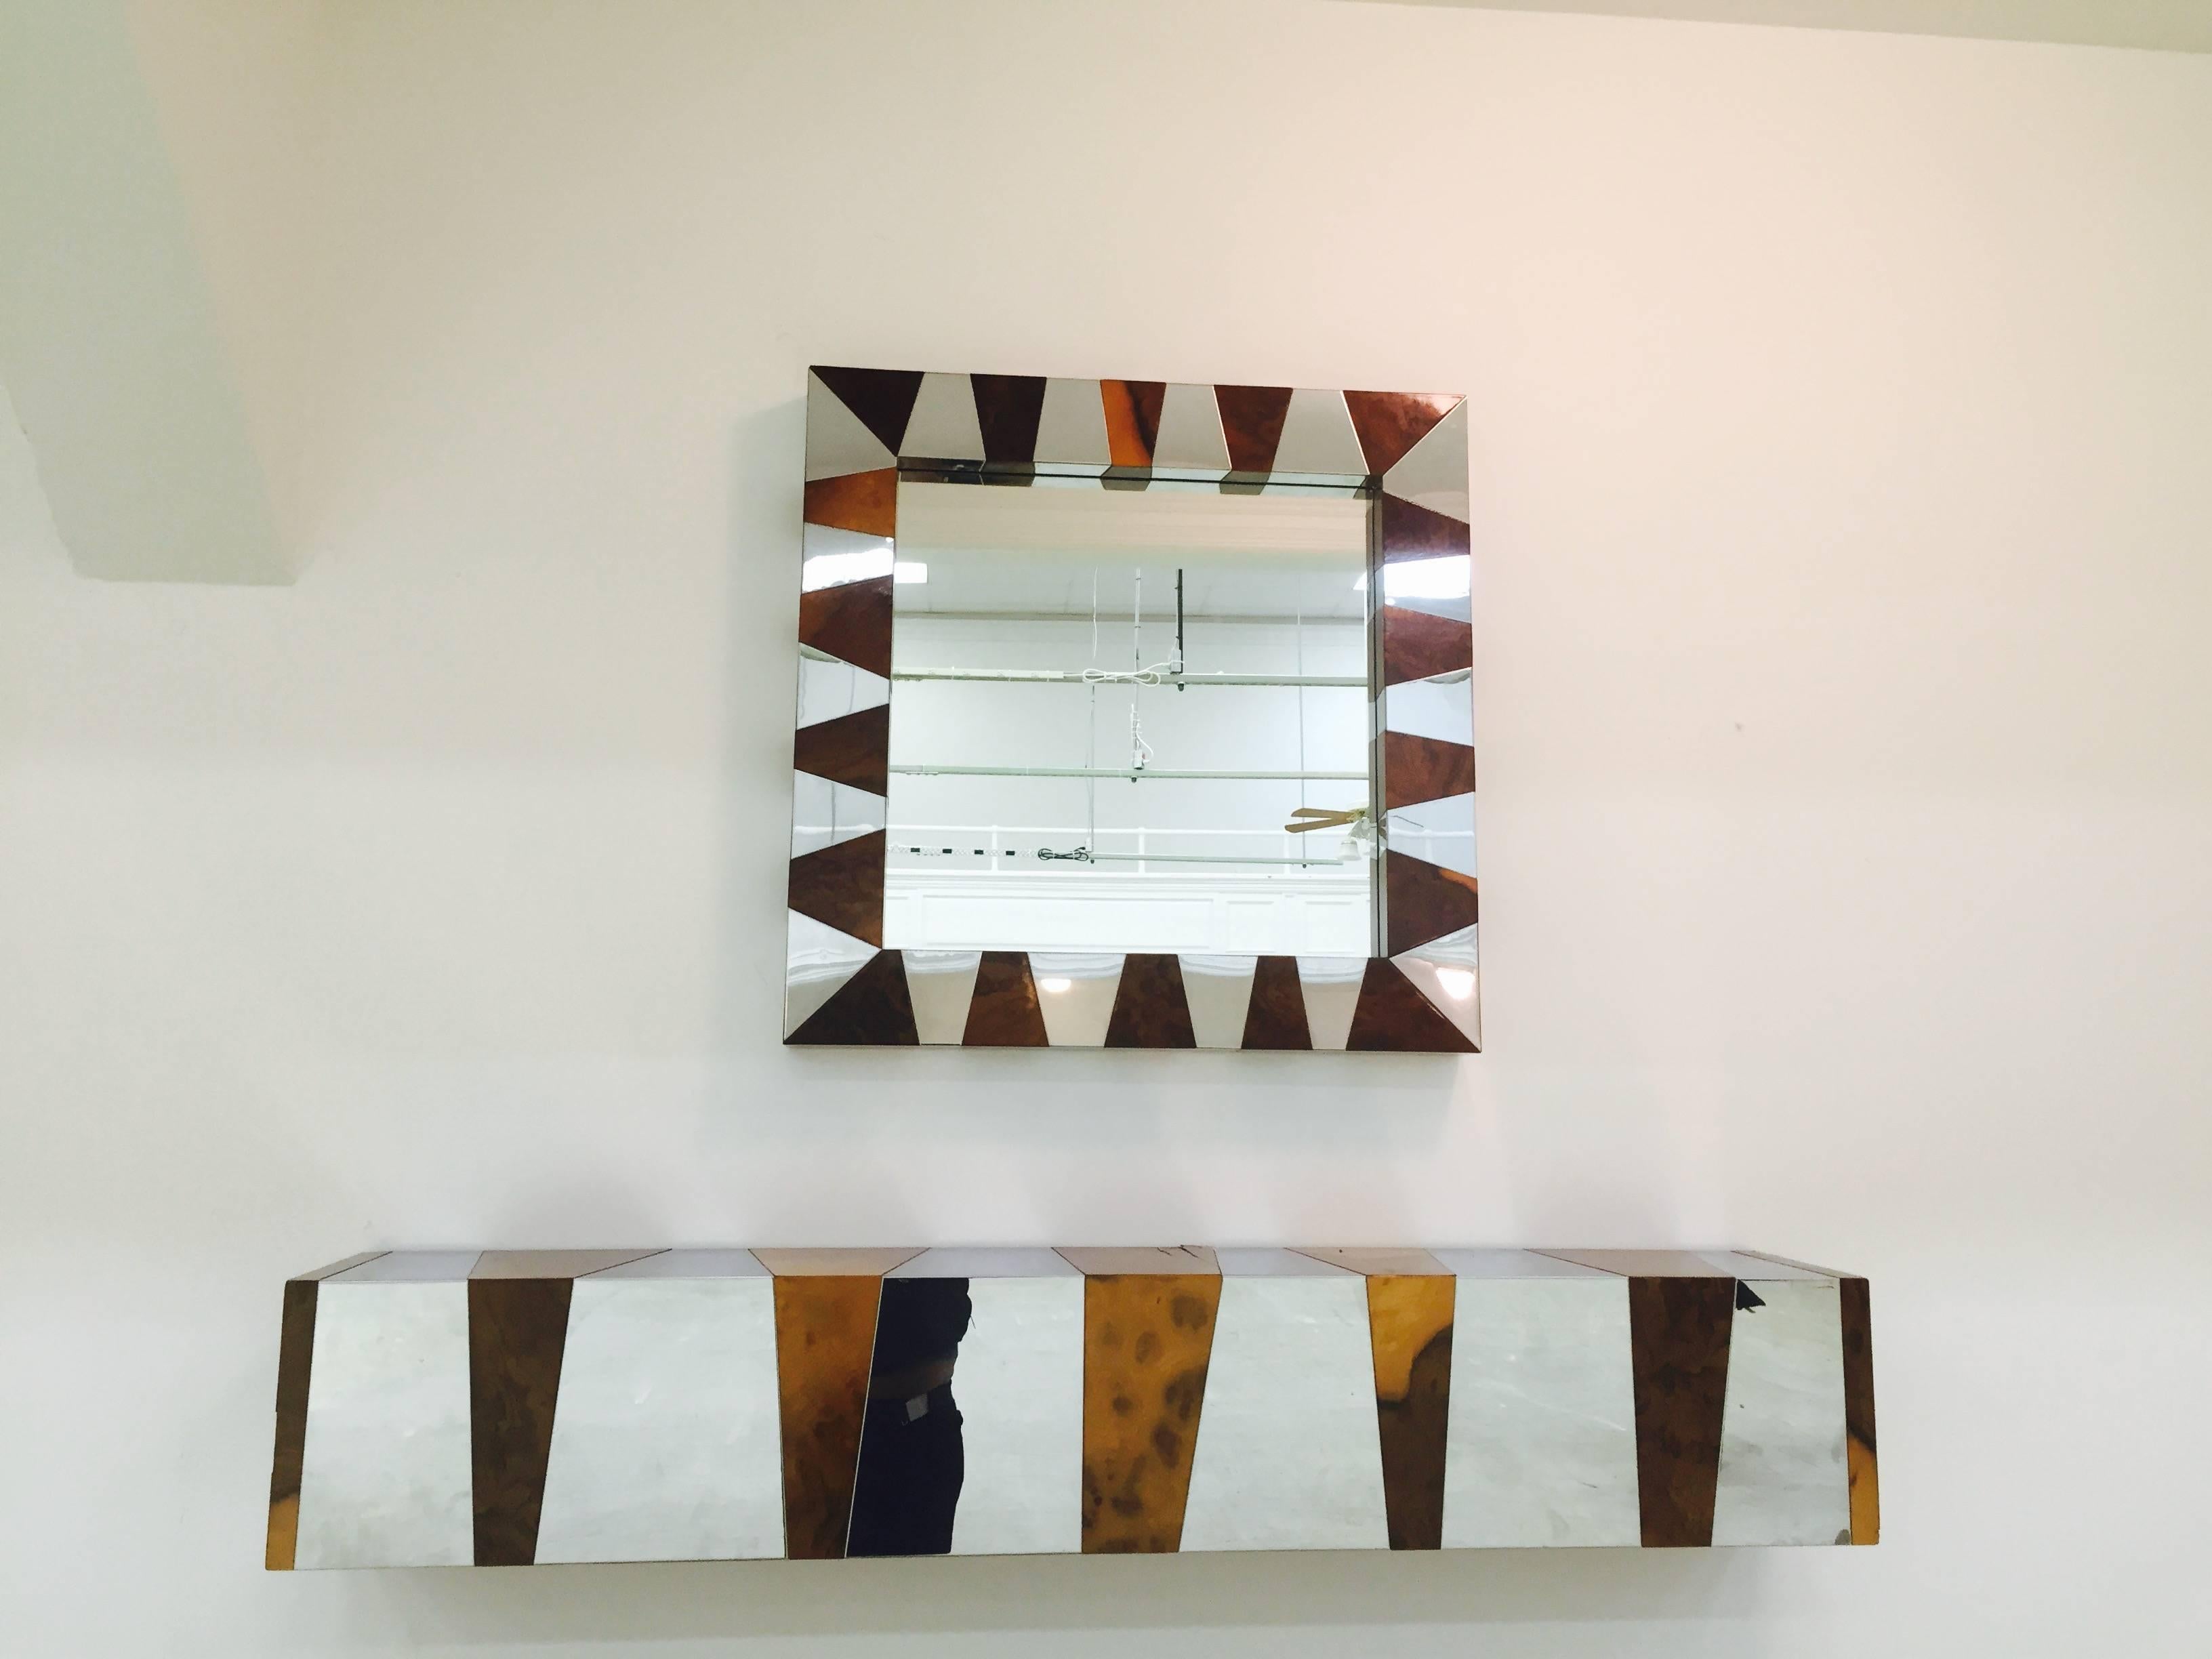 A Paul Evans cityscape floating shelf, or wall-mounted console with mirror in chrome with burl wood, circa 1970s.

Mirror is 30" W x 39.75" H x 3" D
Console is 60" L x 10" H x 10" D.